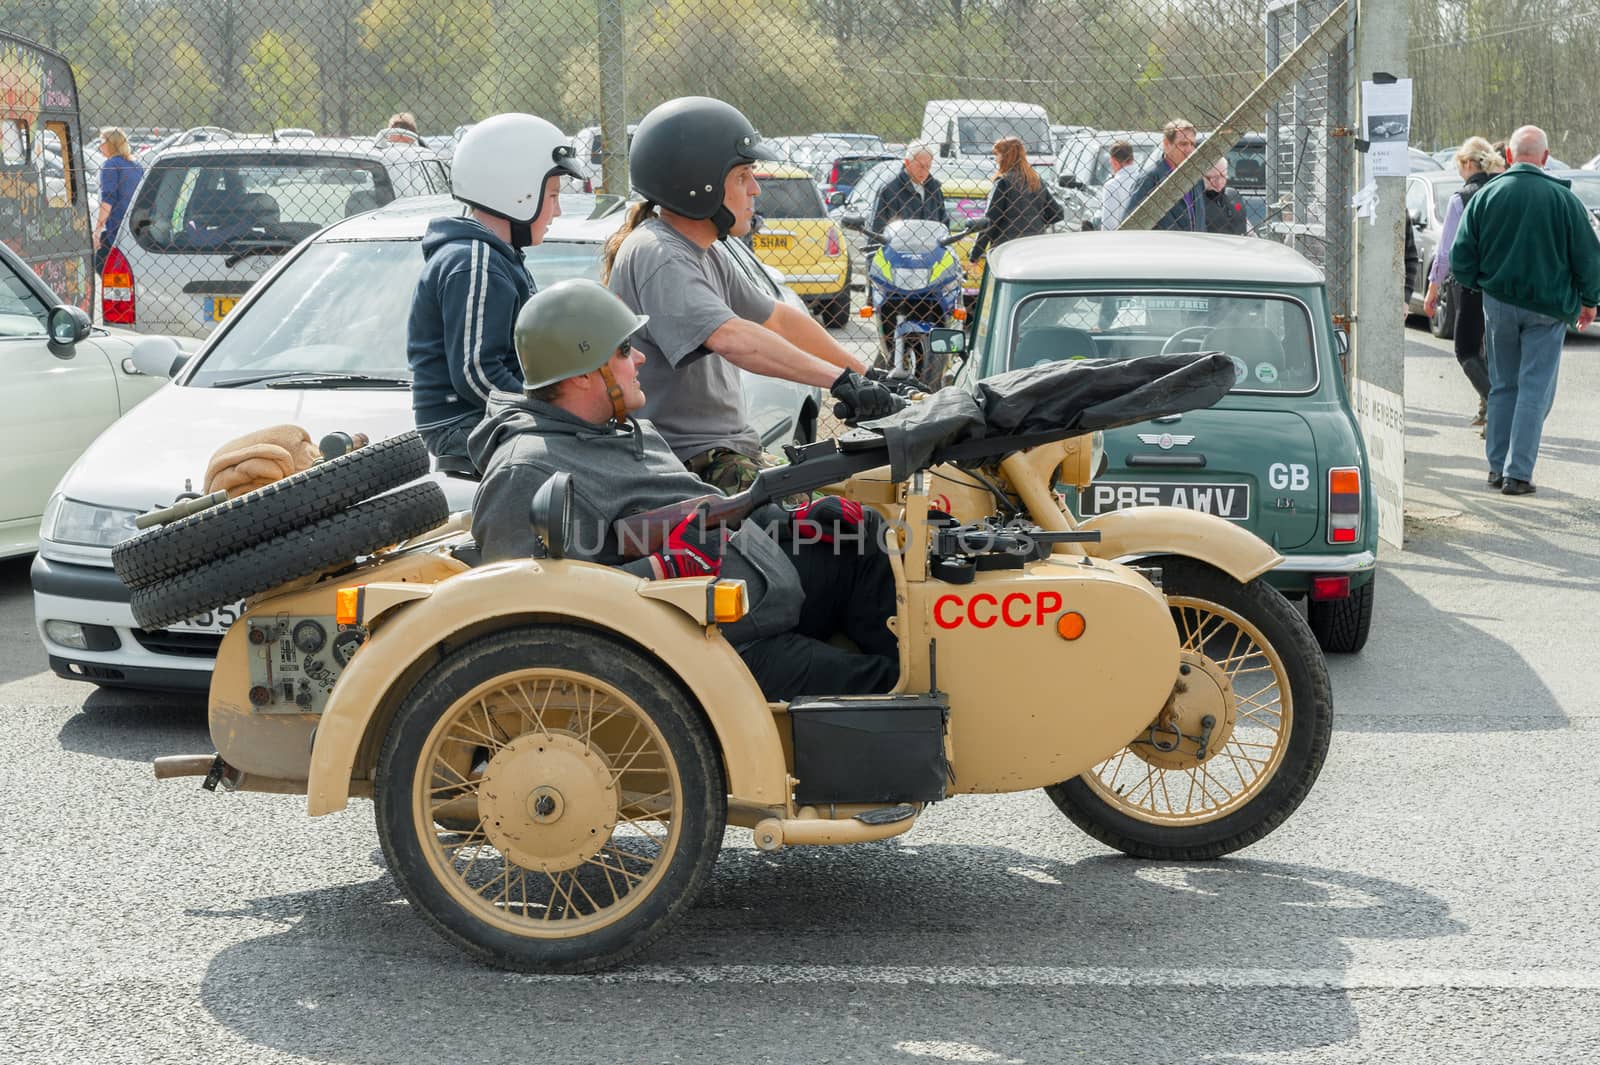 FARNBOROUGH, UK - APRIL 6, 2012: Vintage Soviet military motorcycle arriving for the annual Wheels Day auto and bike show on April 6, 2012 in Farnborough, UK.